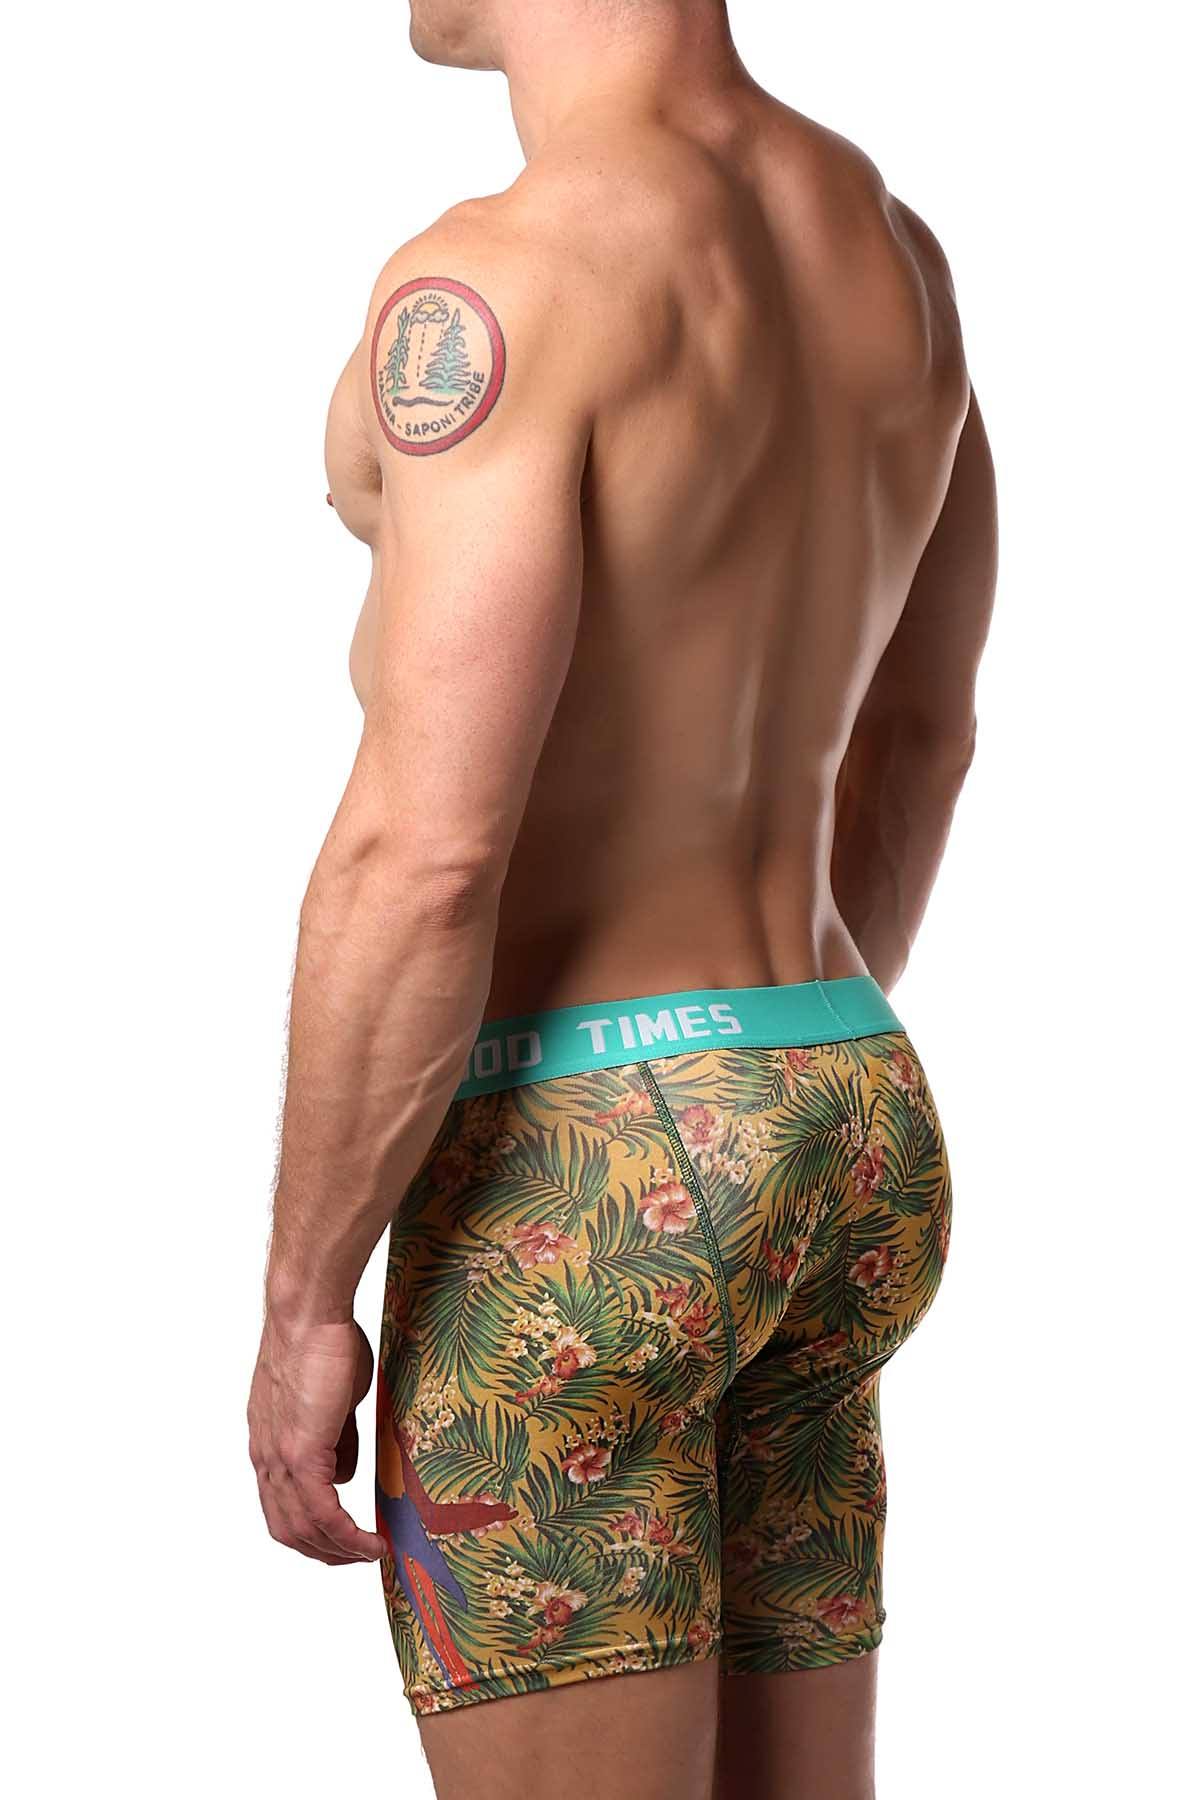 Buttcovers Tropic Good Times Boxer